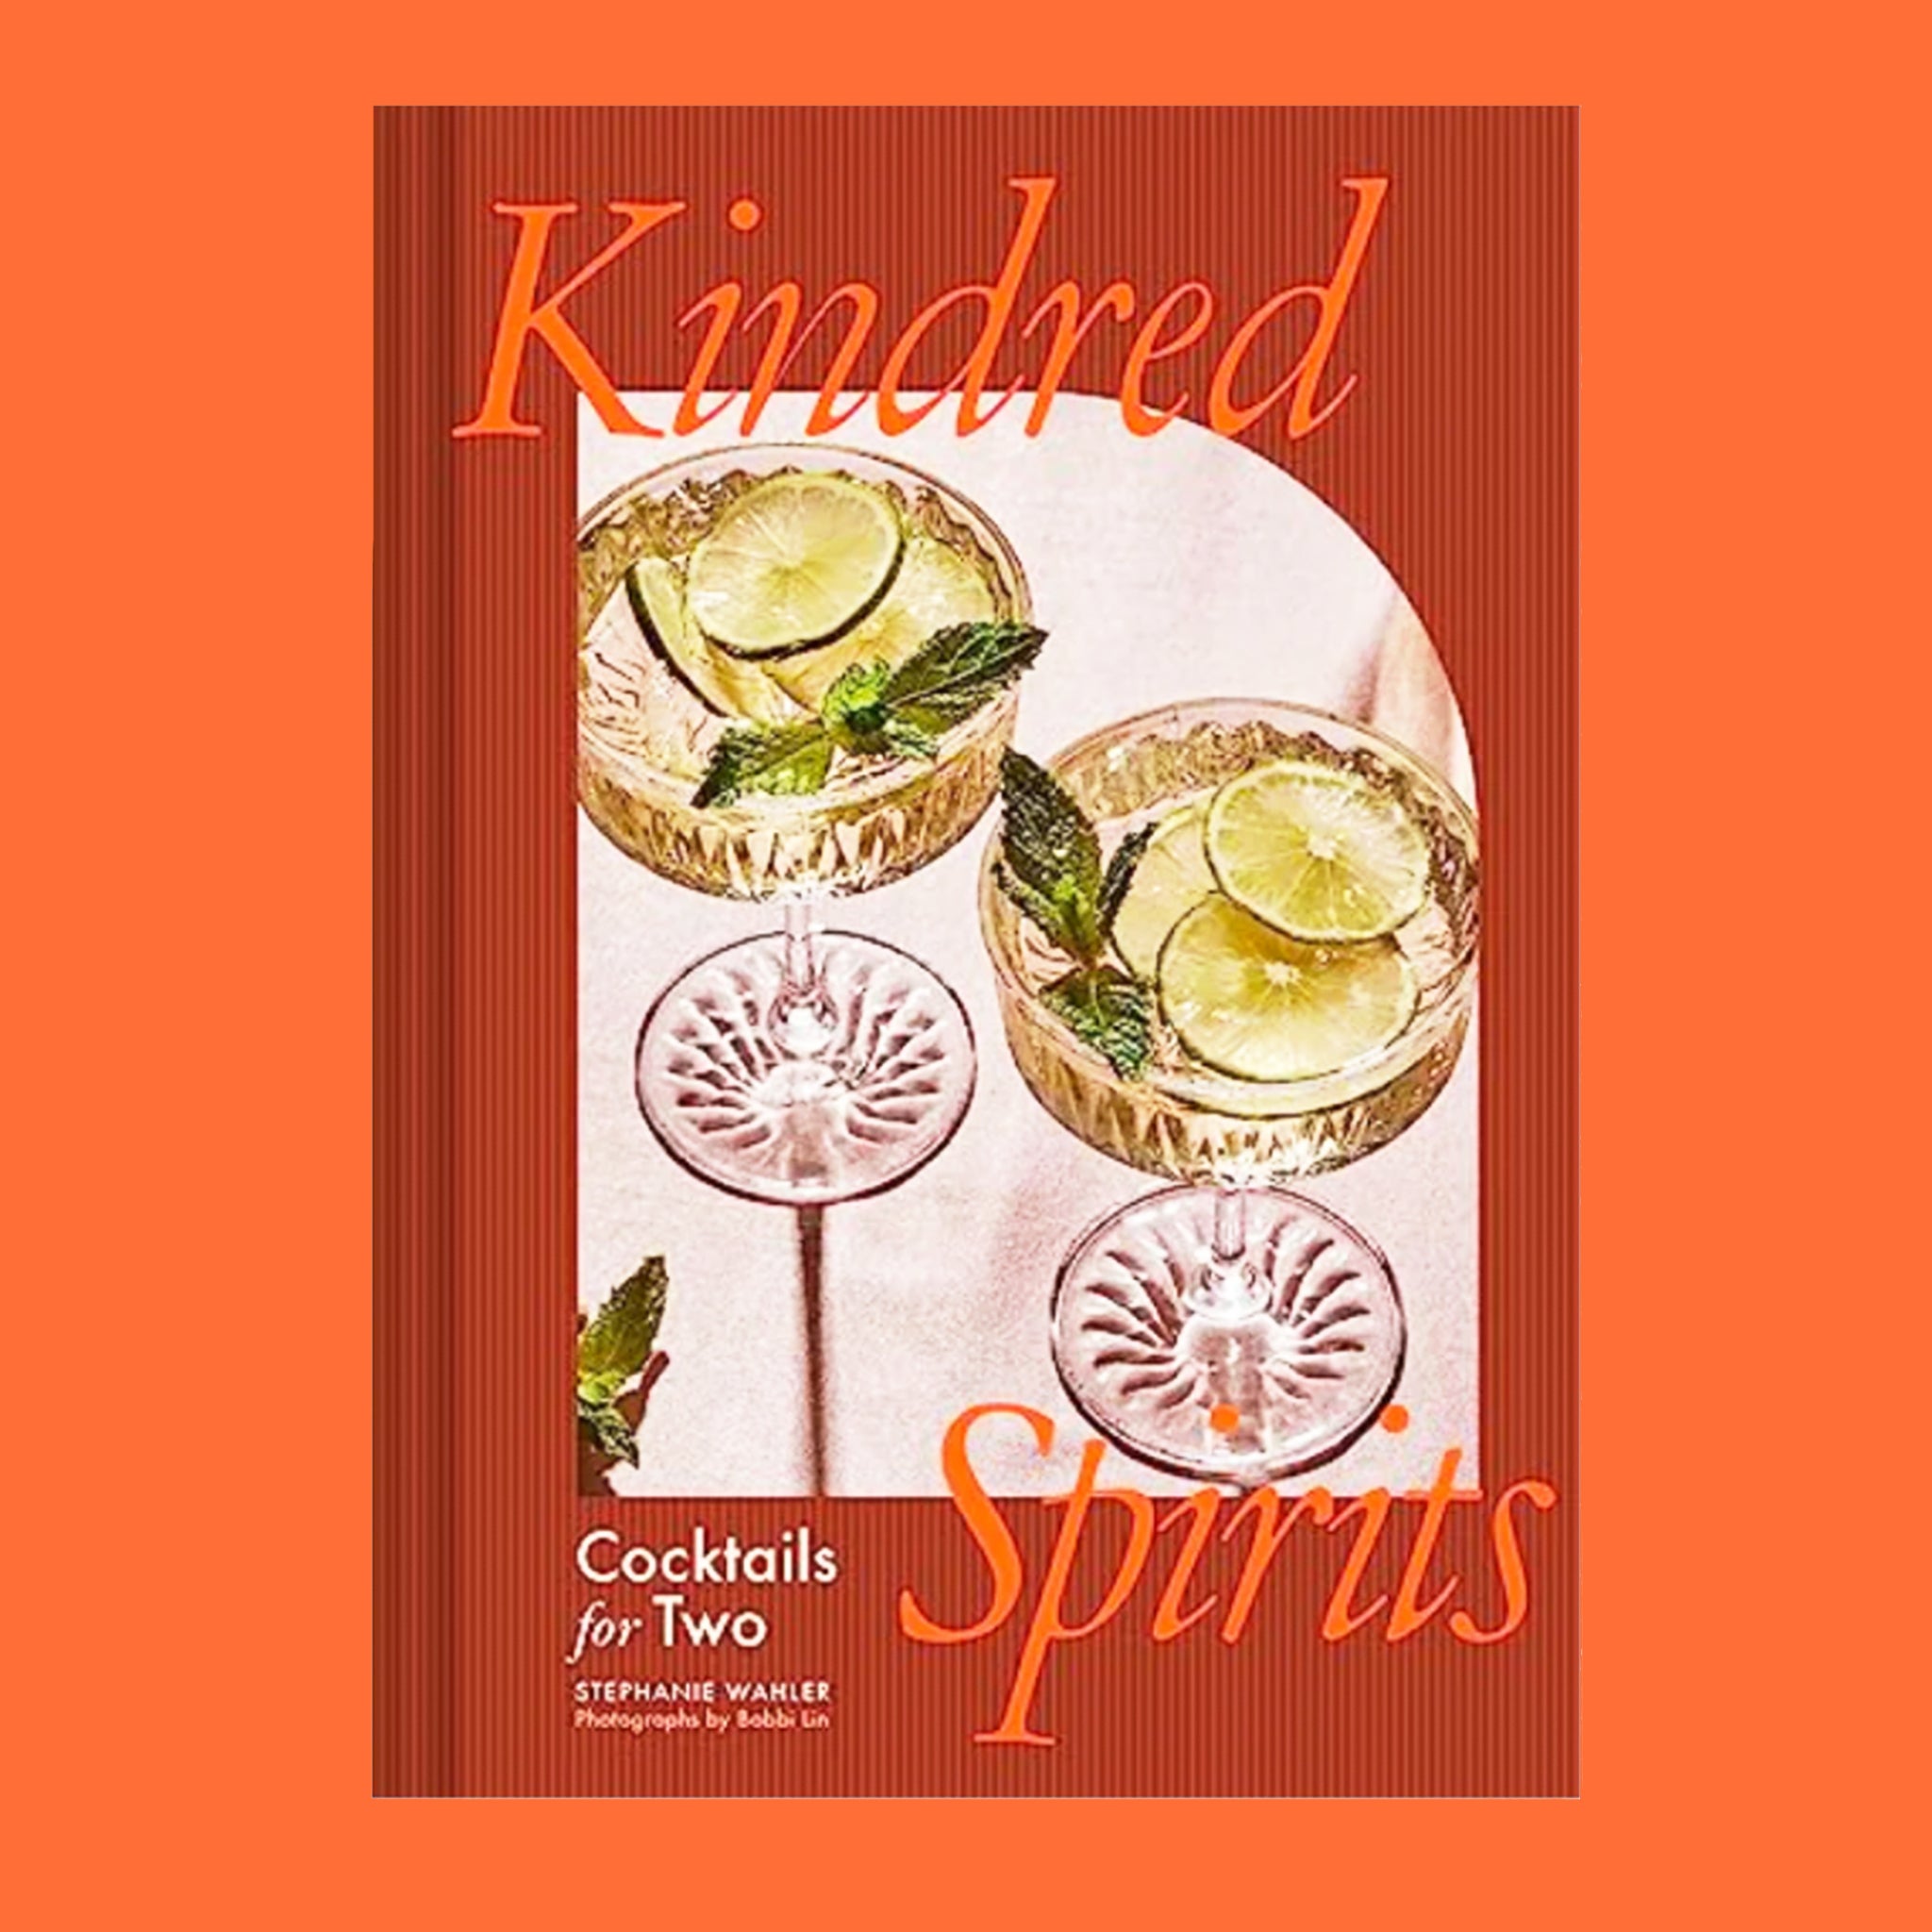 A burnt reddish orange book cover with a photograph of two beverages in coupe glasses and the title that reads, "Kindred Spirits".